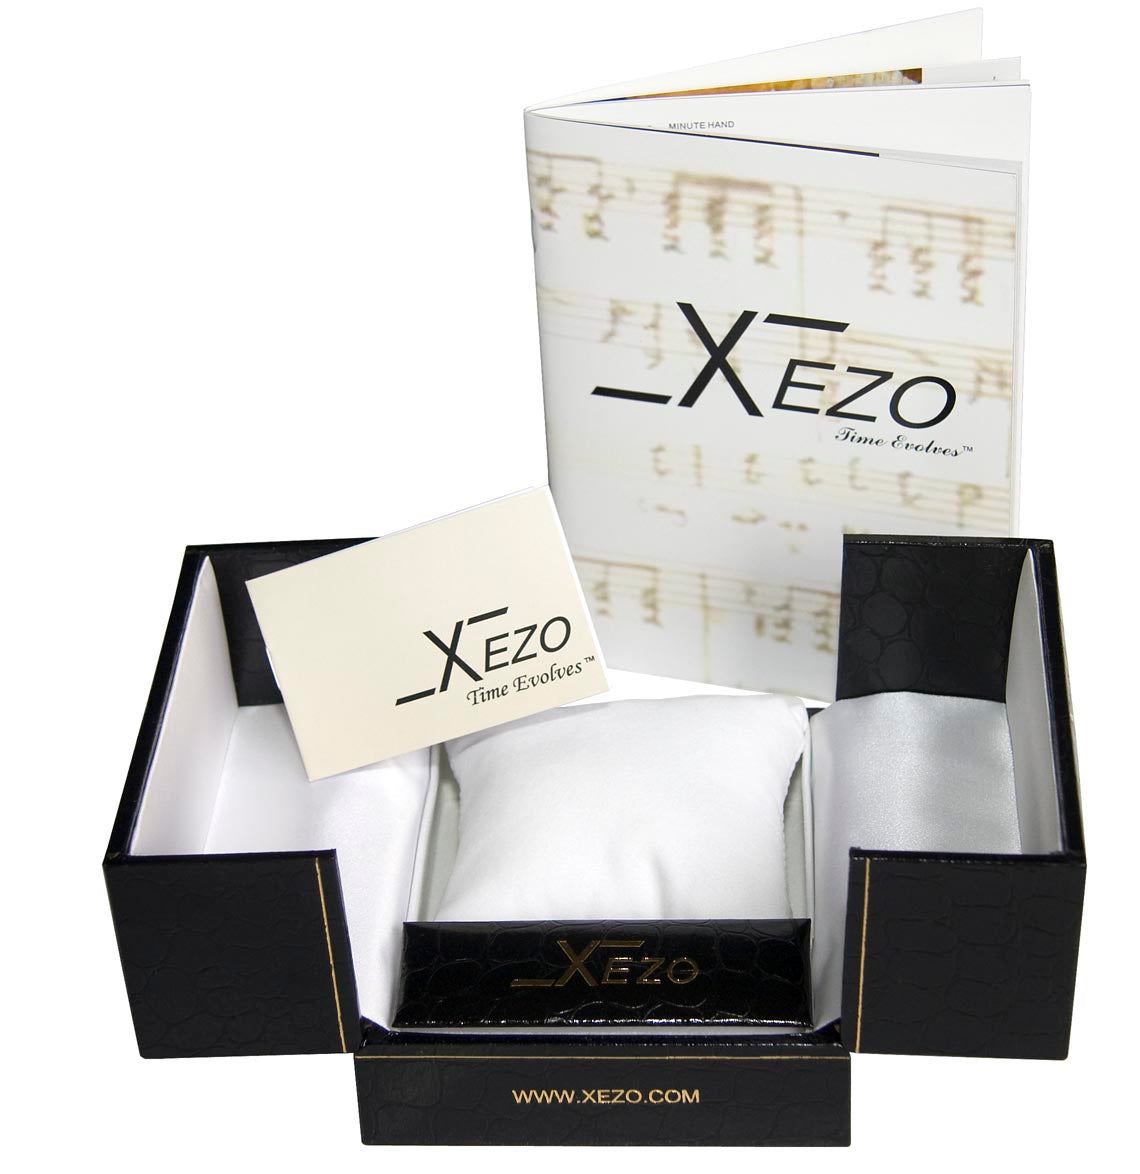 Xezo - Black gift box, certificate, and manual of the Architect 2001 SB watch